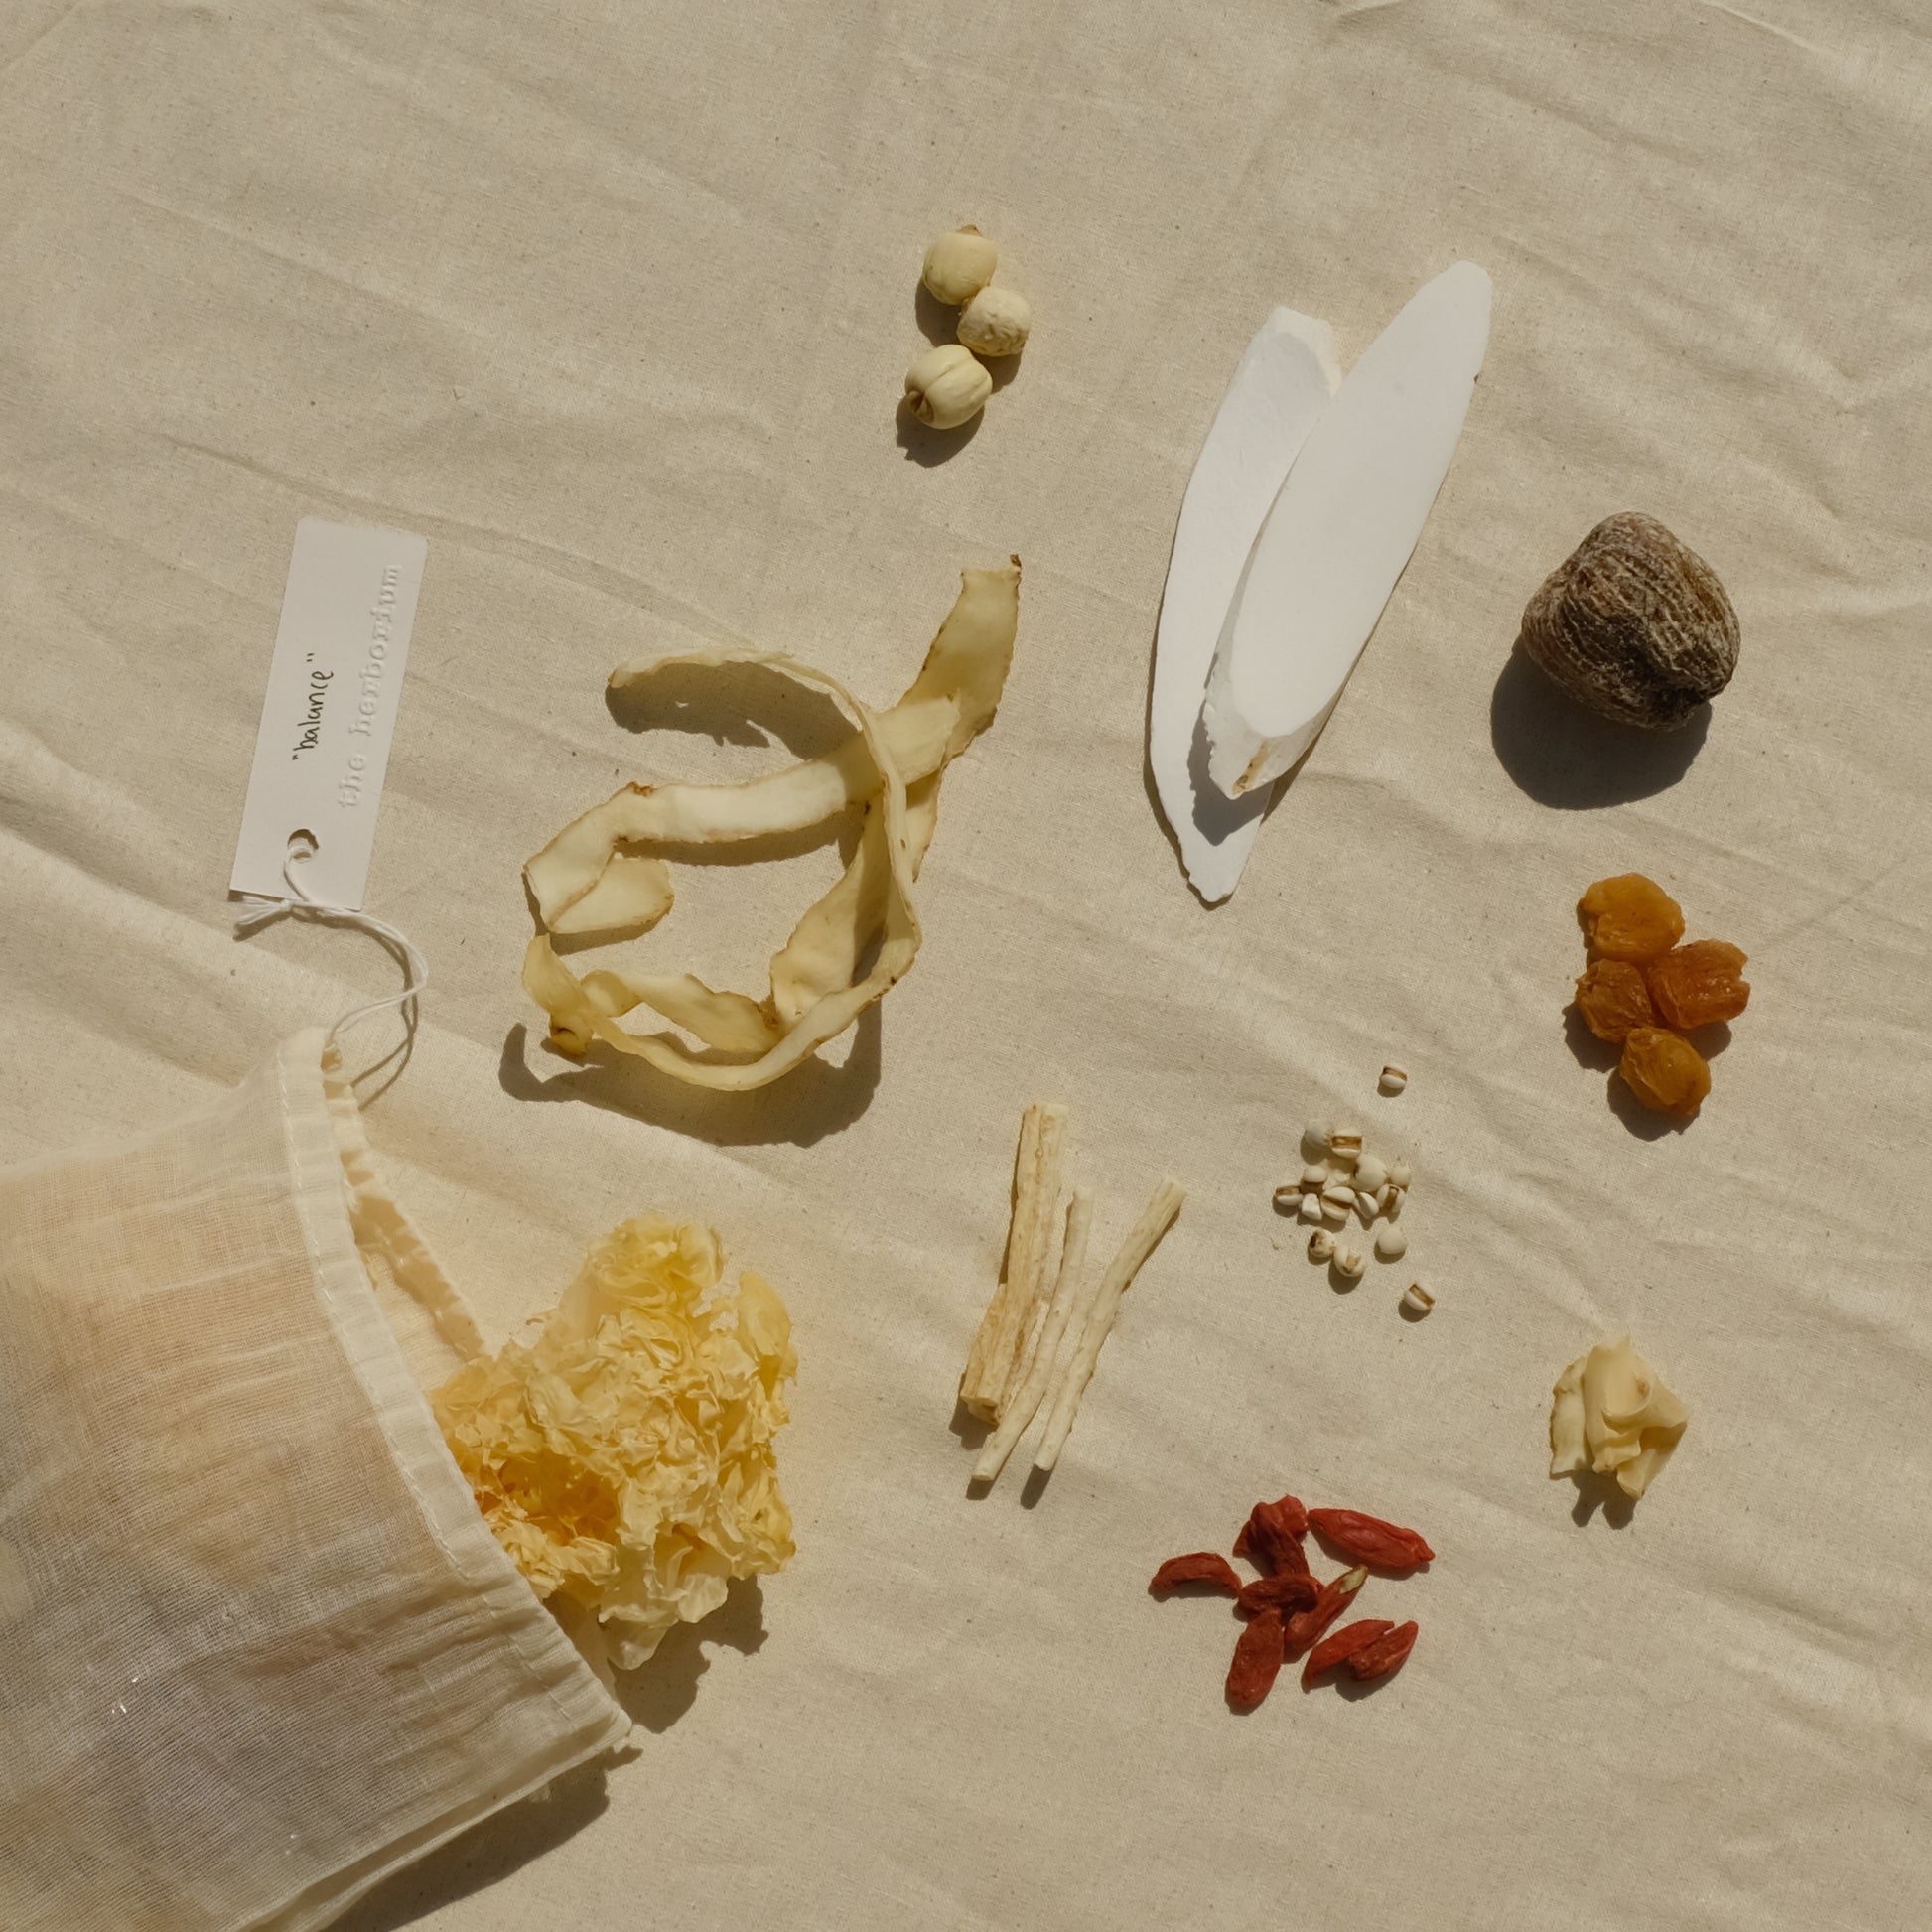 Chinese herbal soup mix blend with cotton muslin bag, snow fungus, Solomon's seal yu zhu, adenophora root Sha shen, goji berries, Chinese barley, lily bulb, lotus seed, Chinese yam, honey date, longan. Image 2